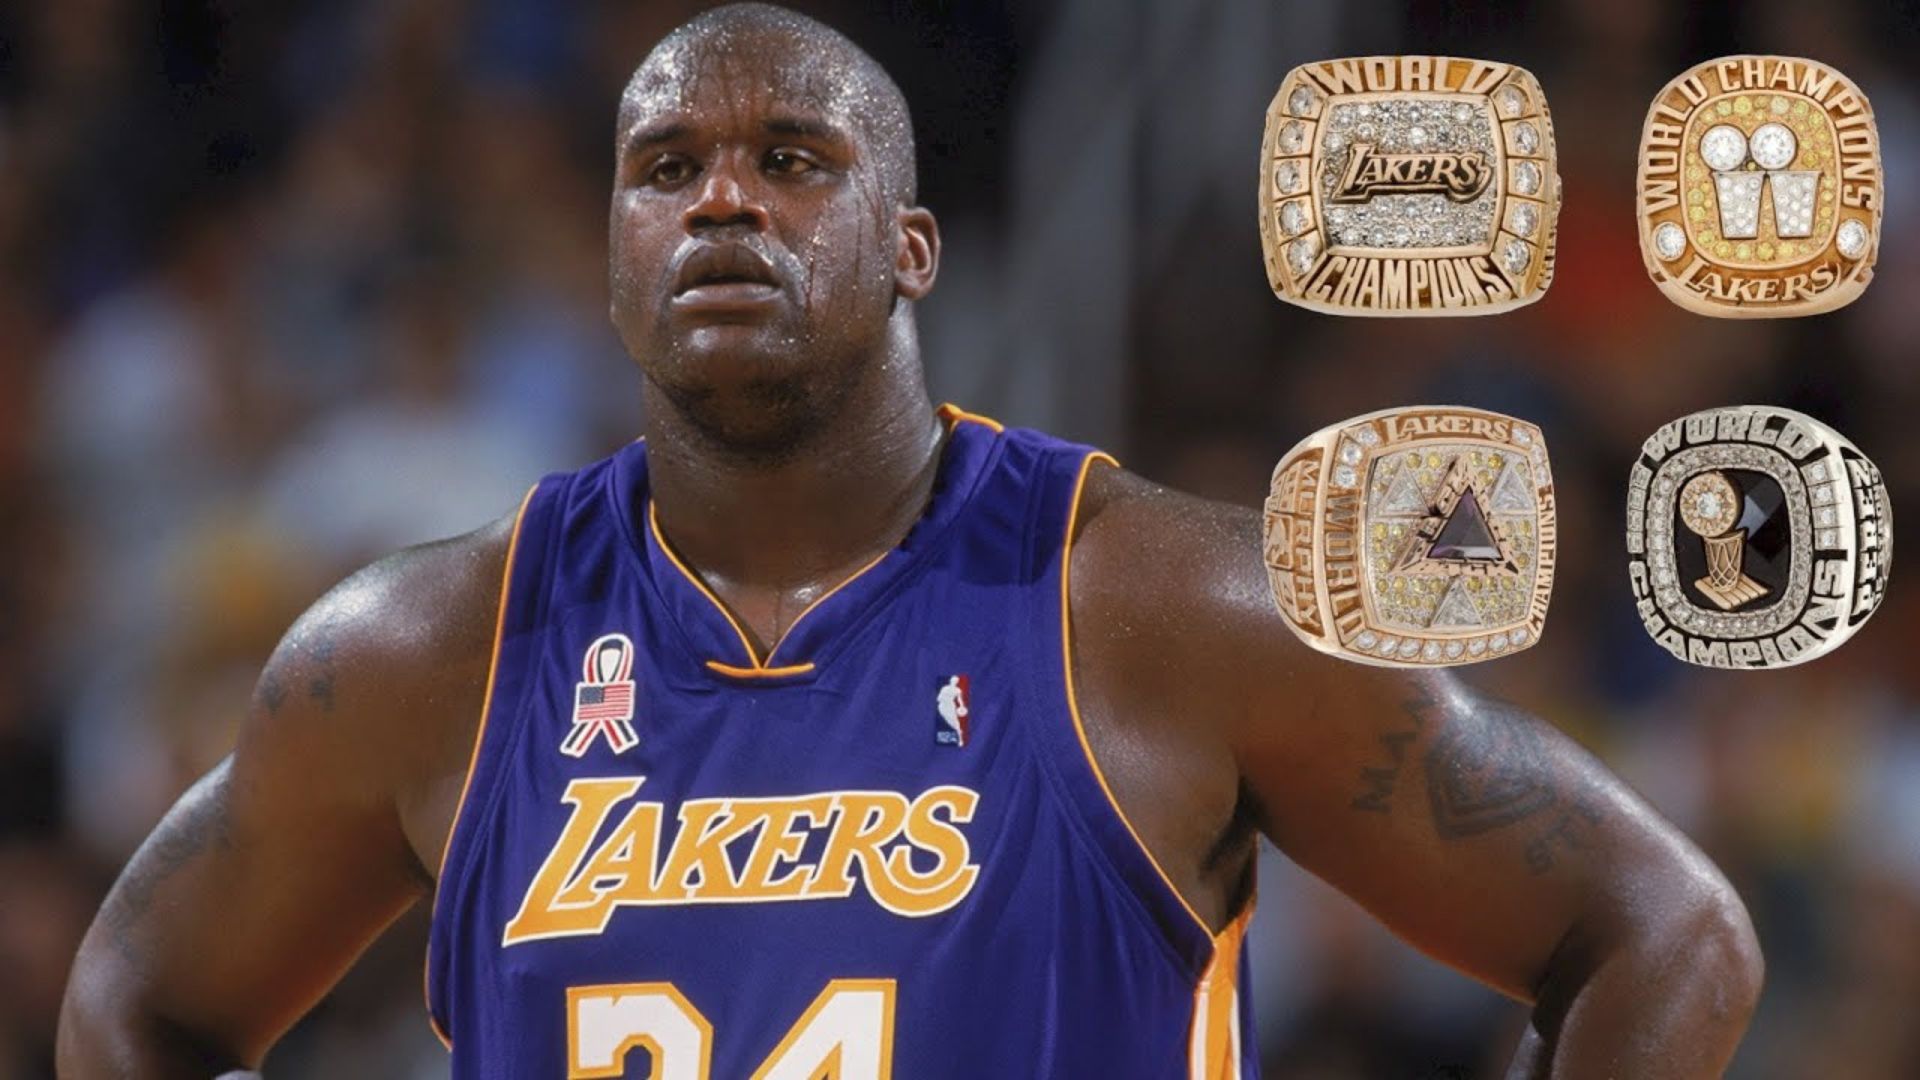 How Many Rings Does Shaquille O'neal Have?